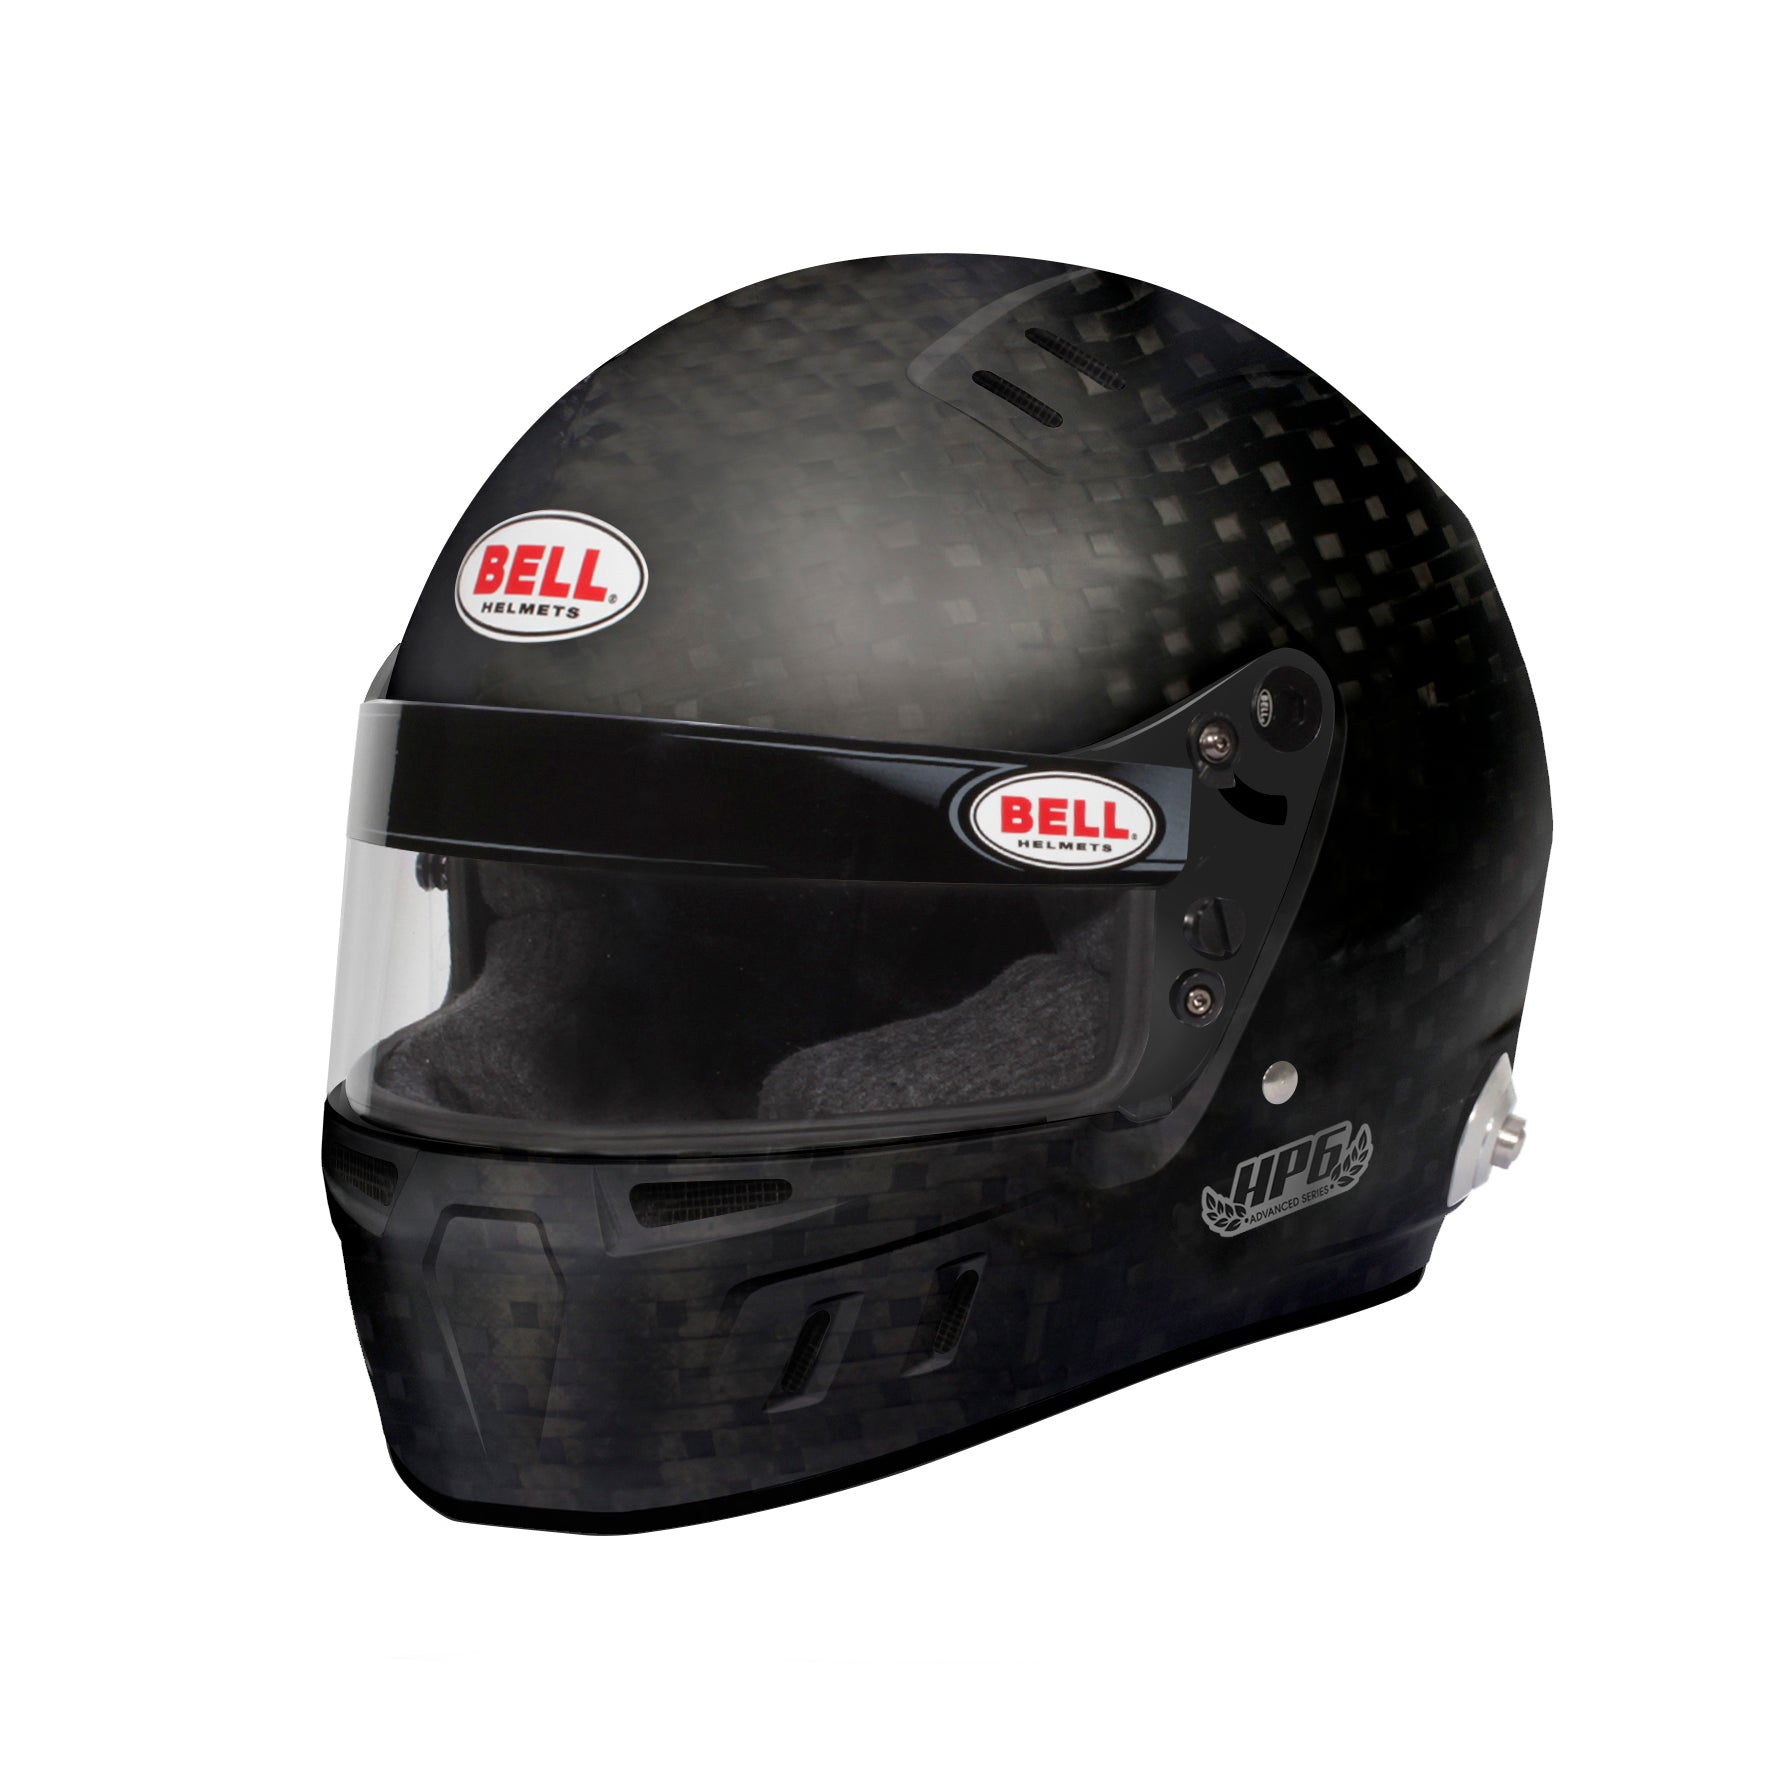 BELL 1140002 HP6 Racing helmet full-face, HANS, FIA8860-2018, carbon, size 55 (6 7/8) Photo-0 